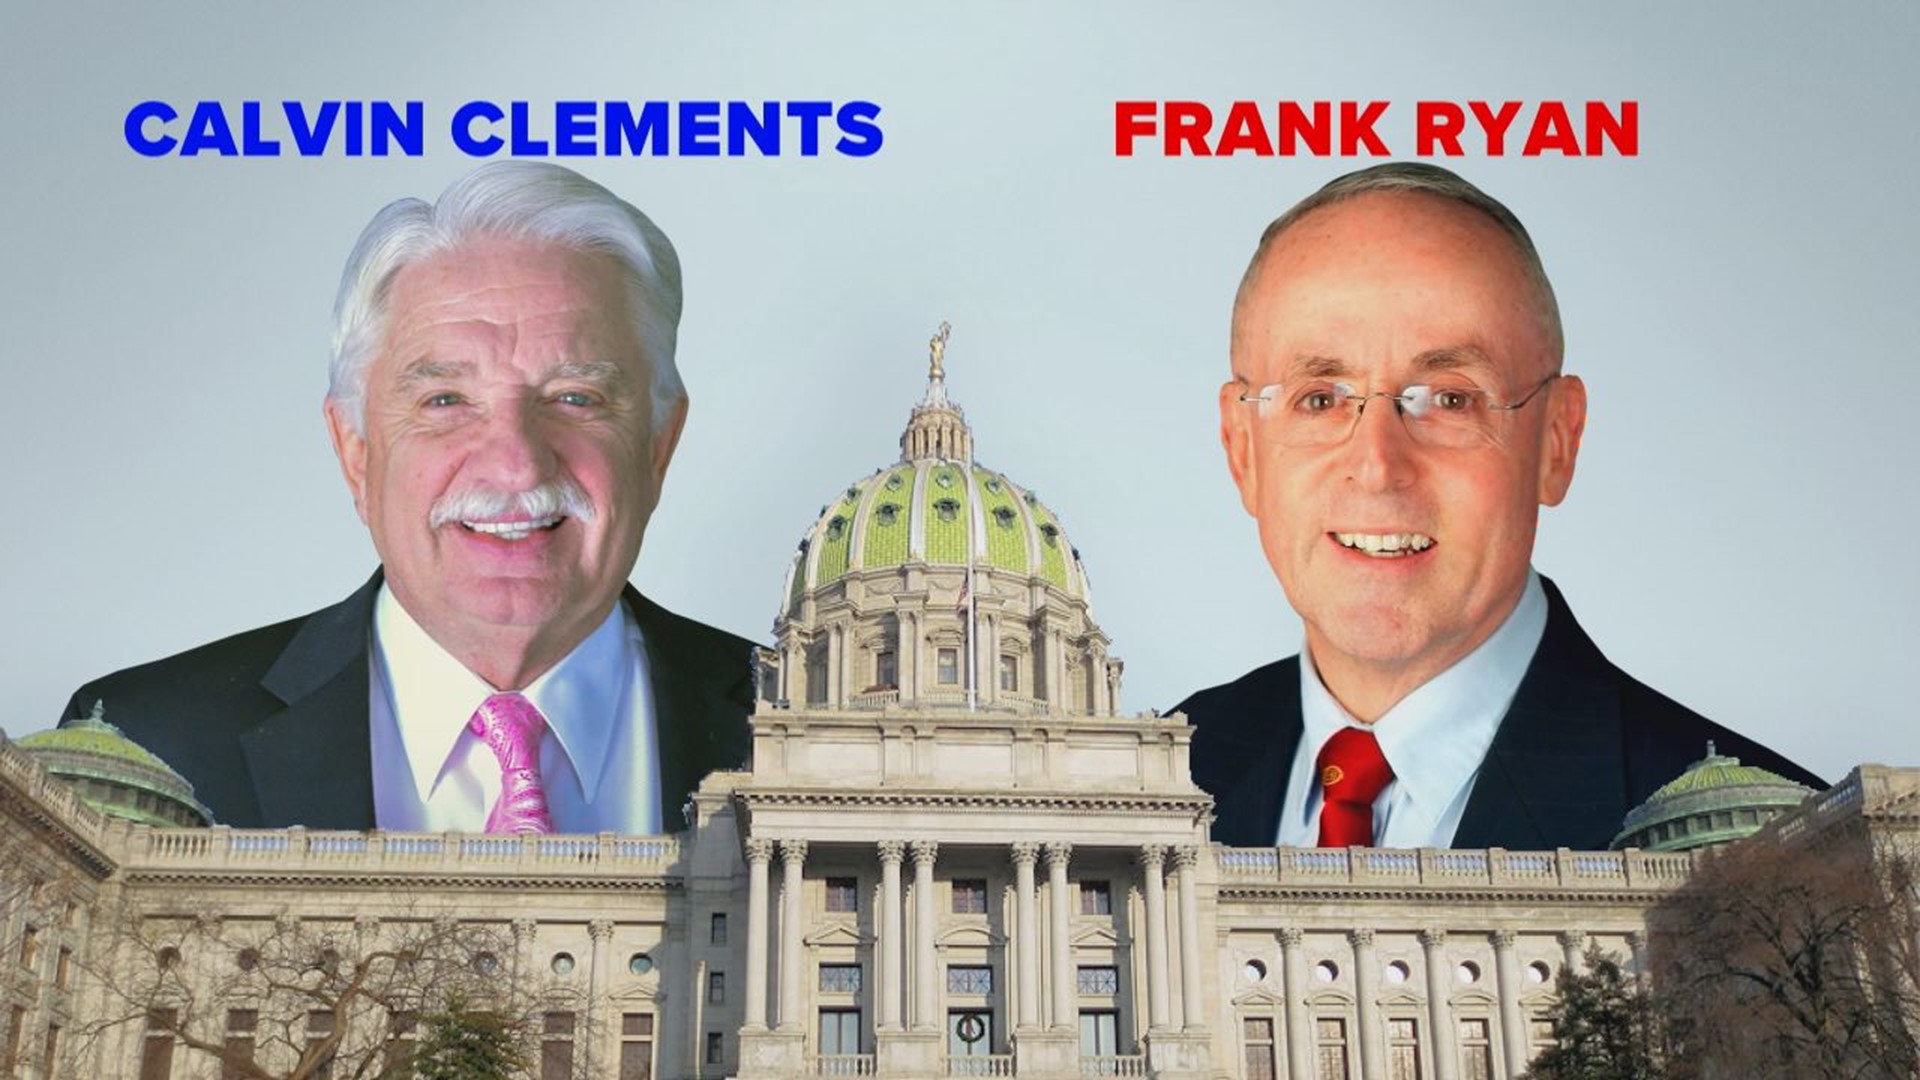 Ryan, a Marine veteran, is seeking a third term in office against "Doc" Clements, a retired veterinarian, in this Lebanon County district.